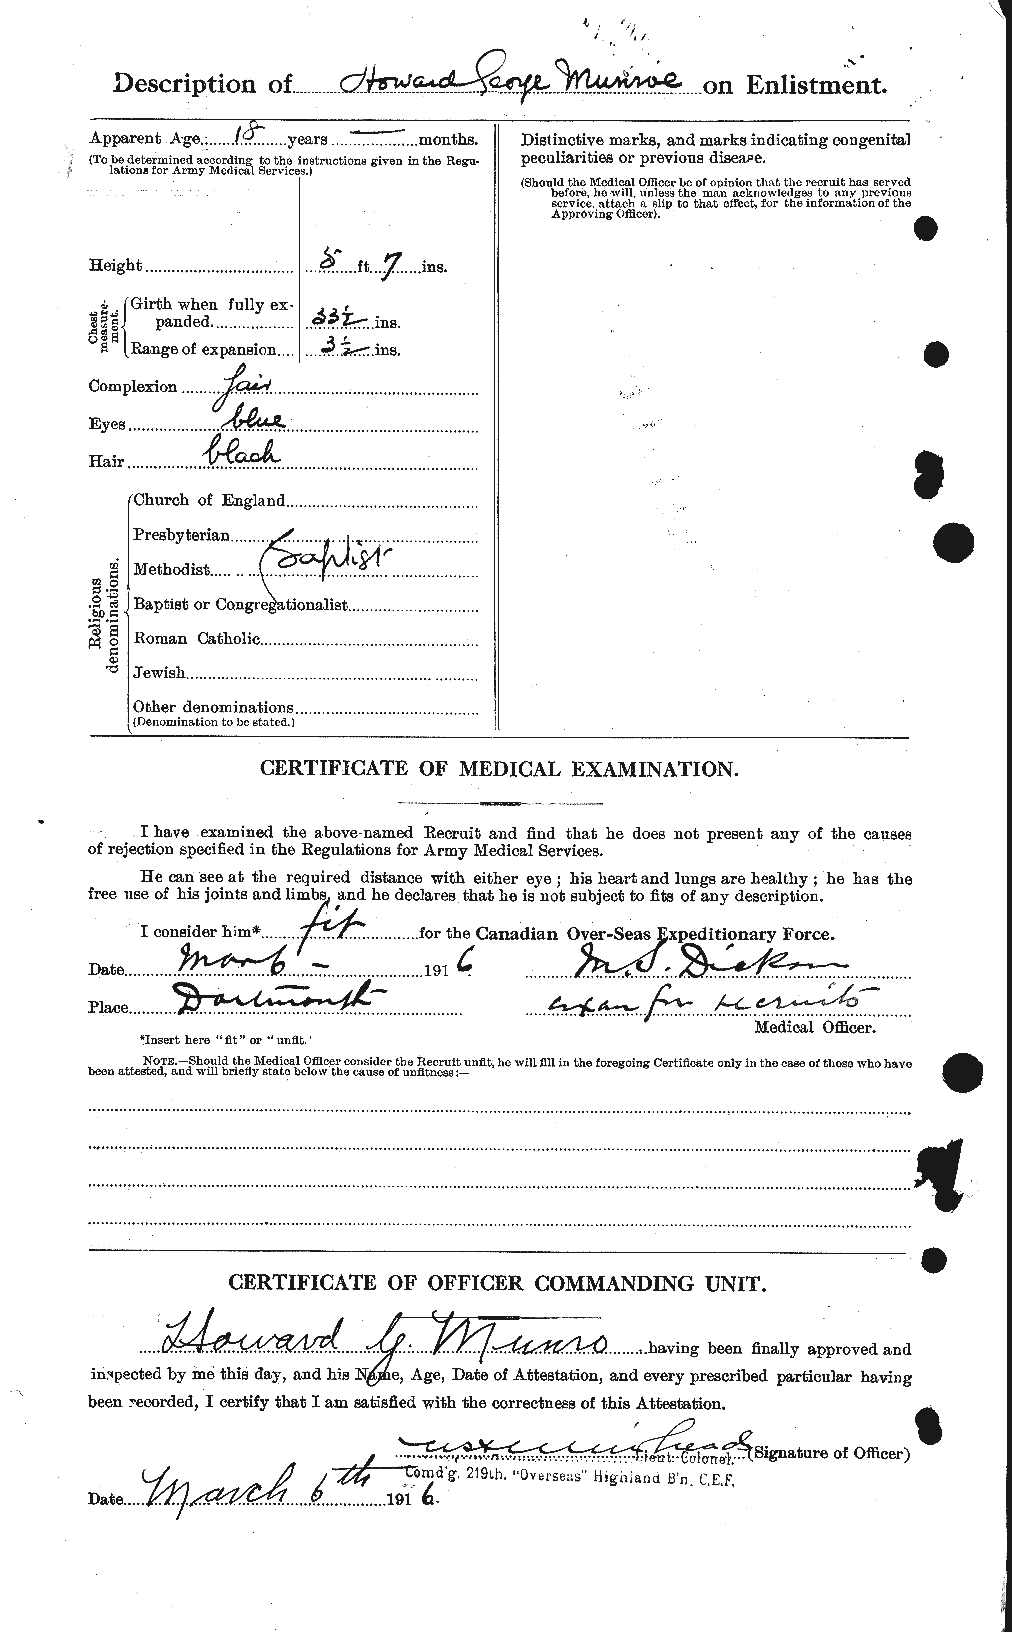 Personnel Records of the First World War - CEF 515523b